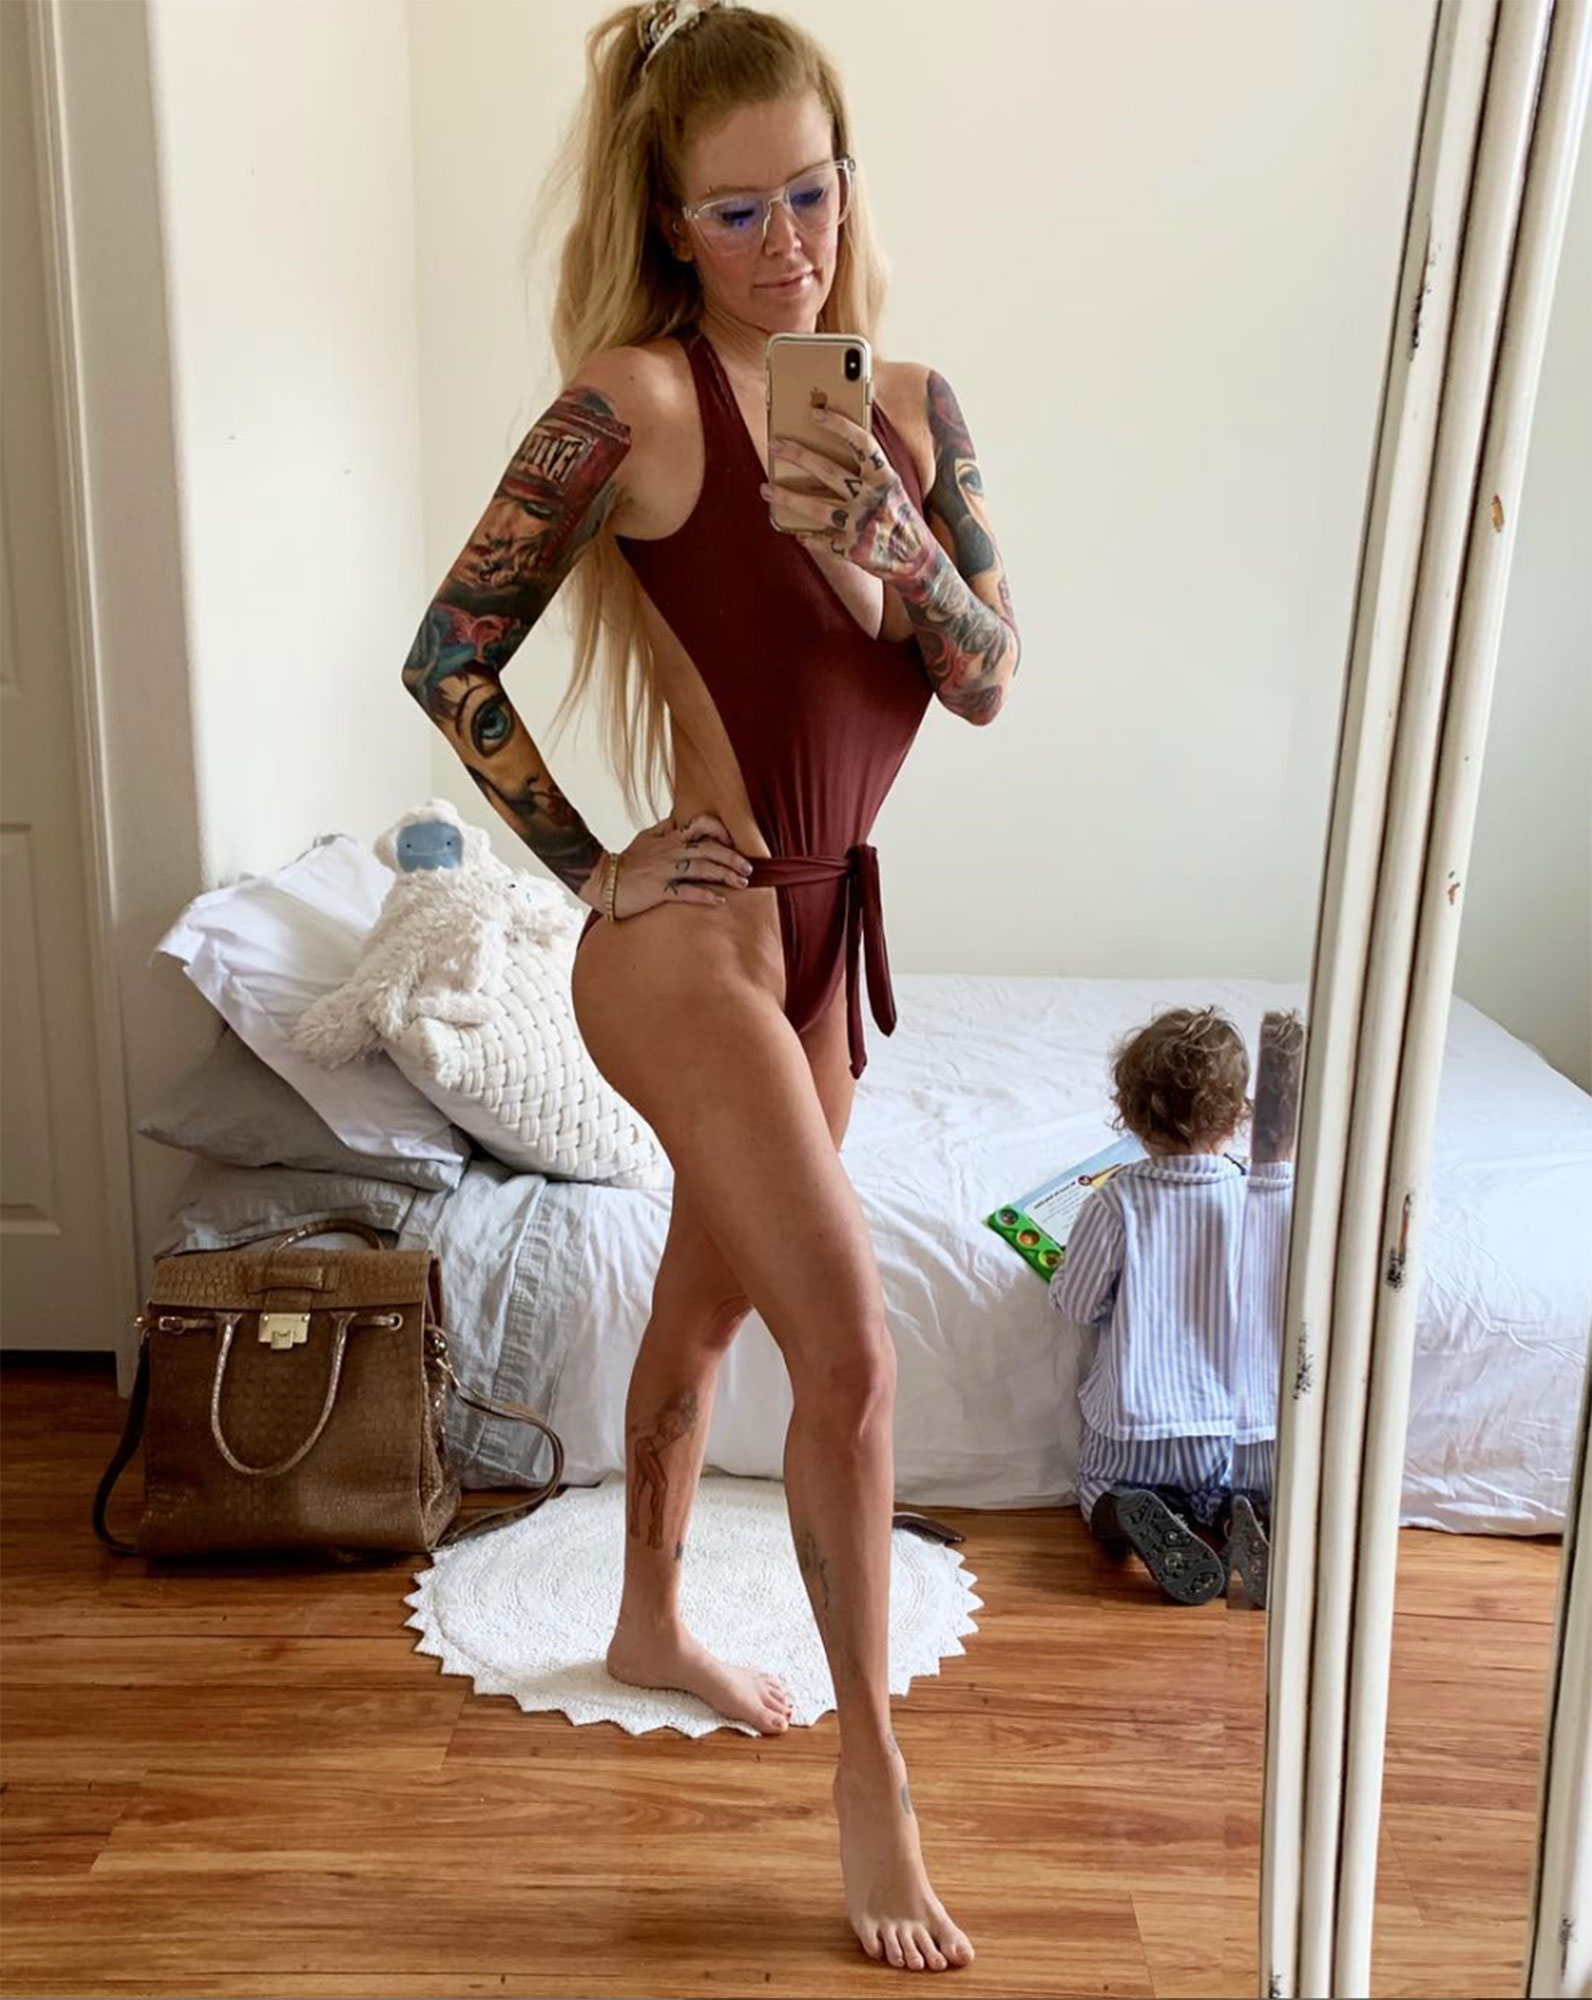 Jenna Jameson Porn Feet - Jenna Jameson Lost 80 Pounds Post-Baby: Pictures, Diet Tips